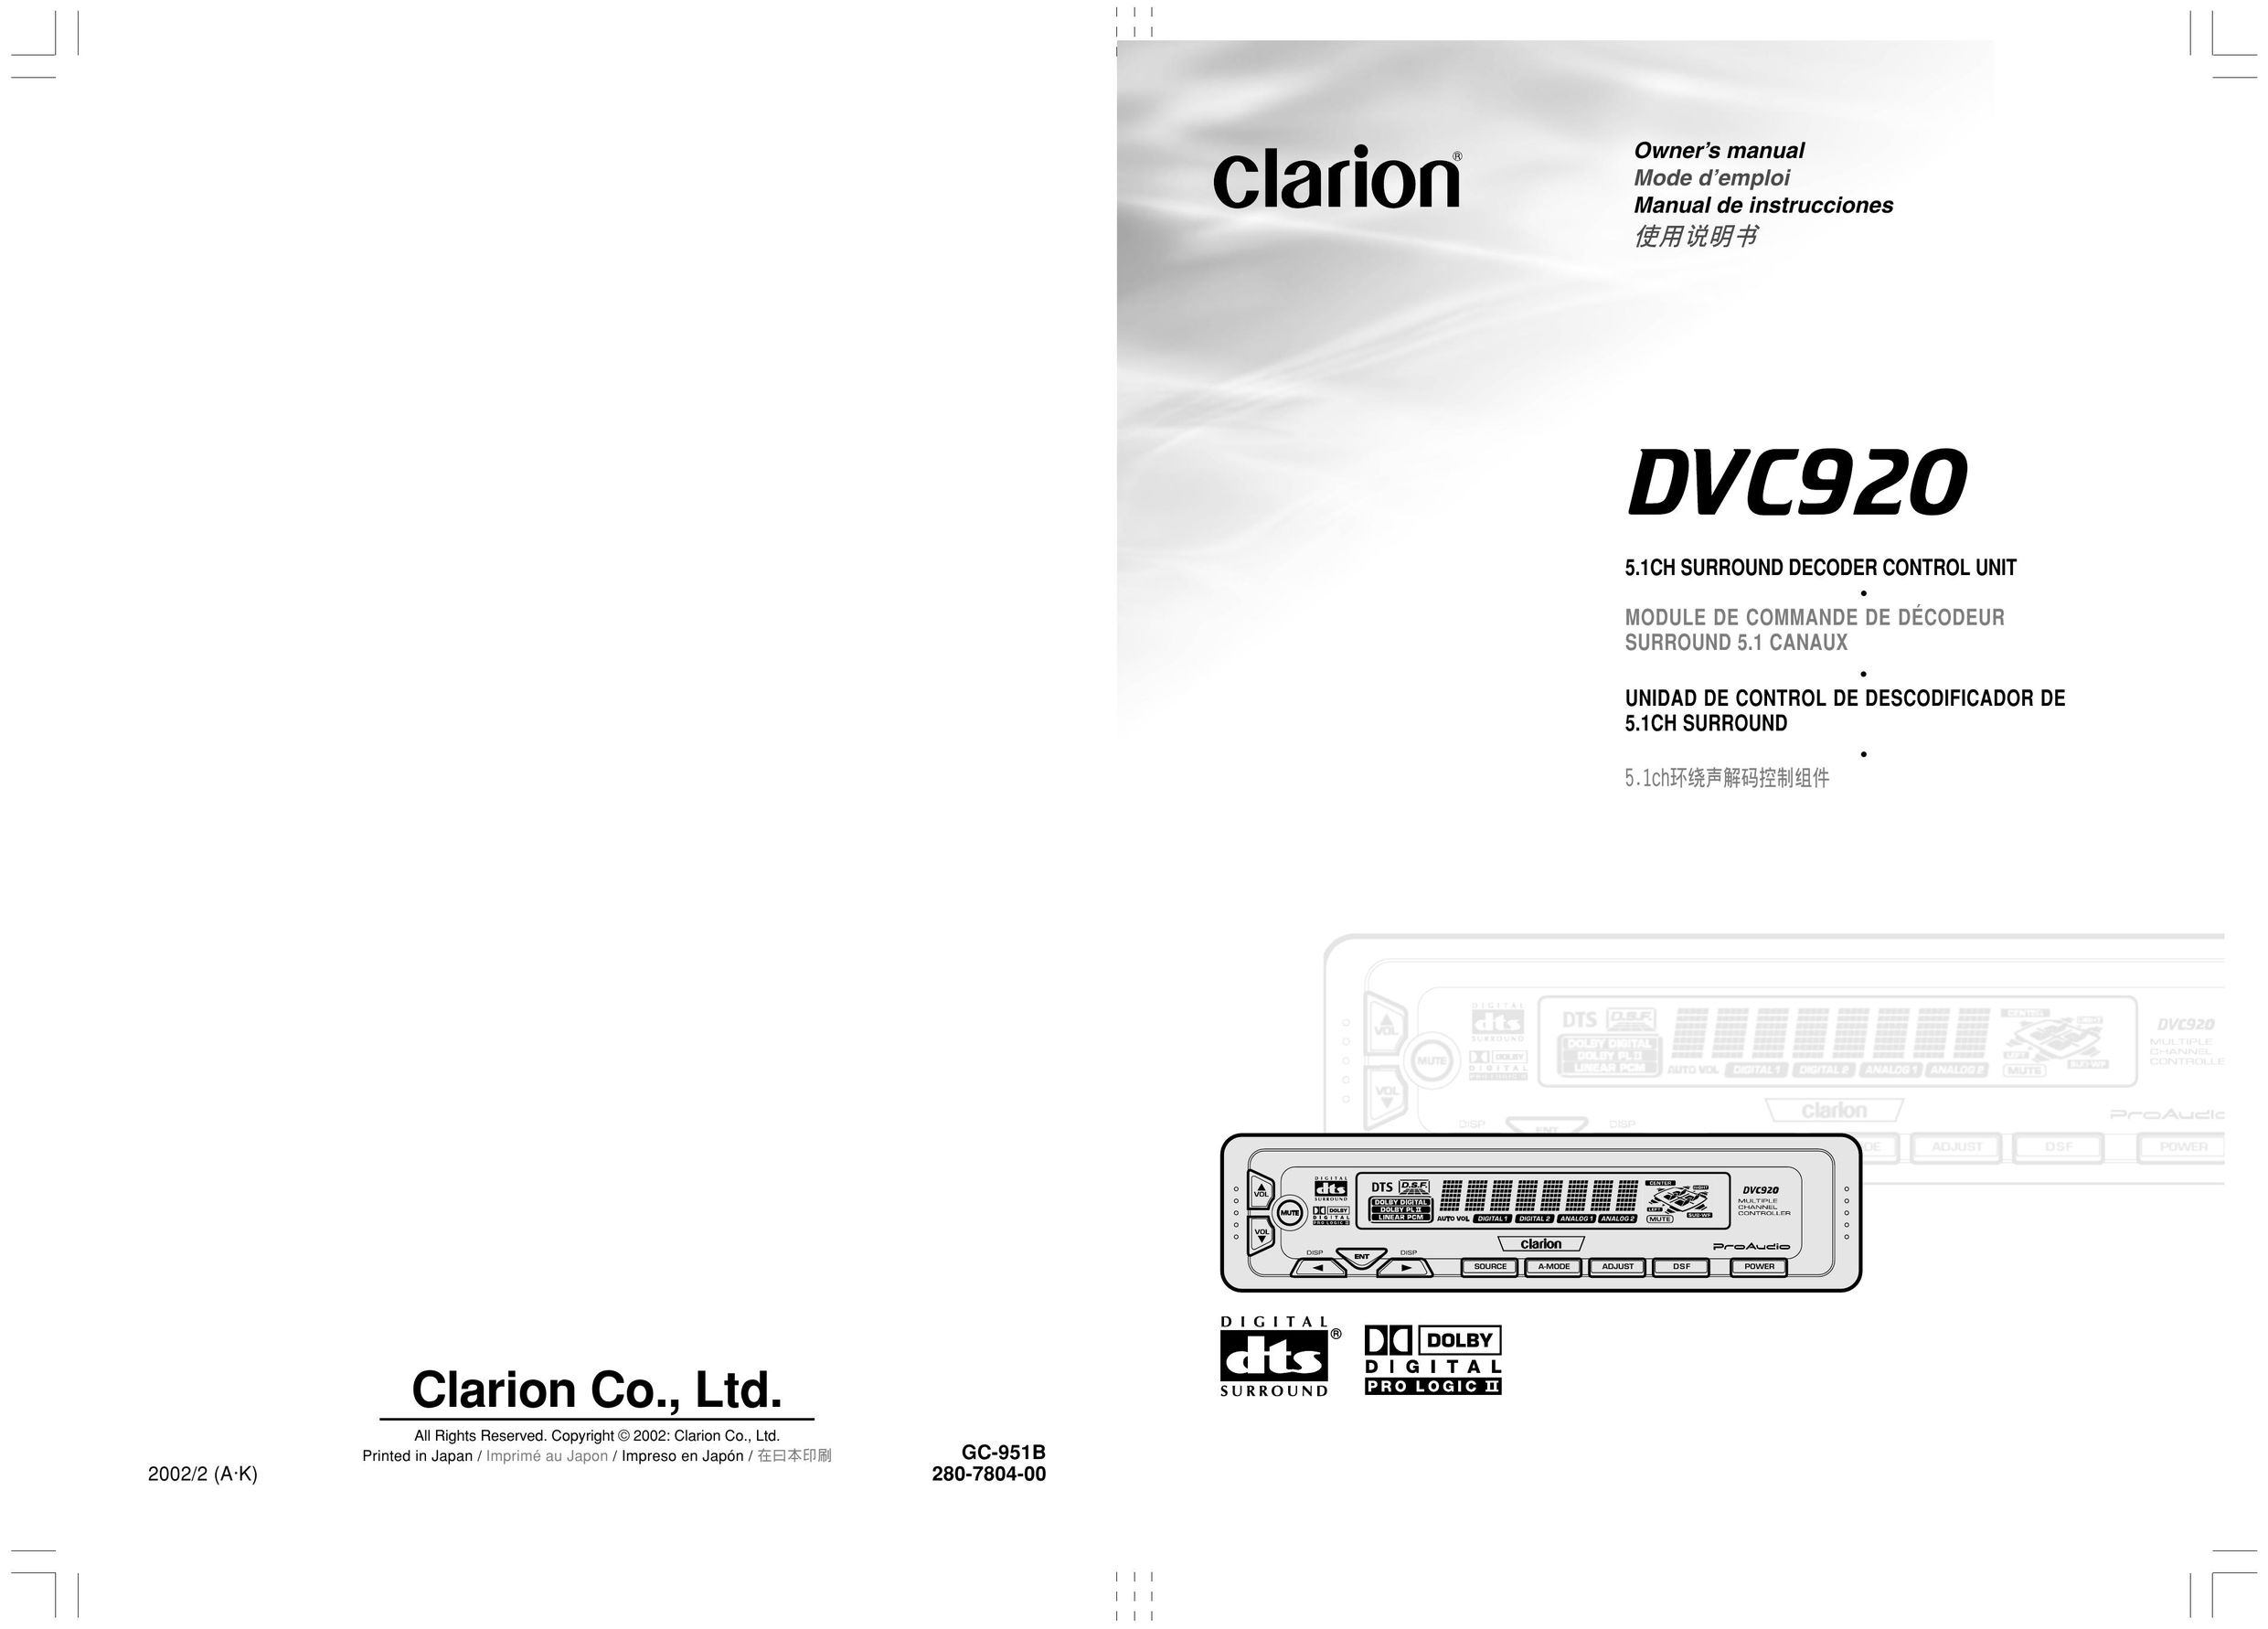 Clarion DVC920 Network Router User Manual